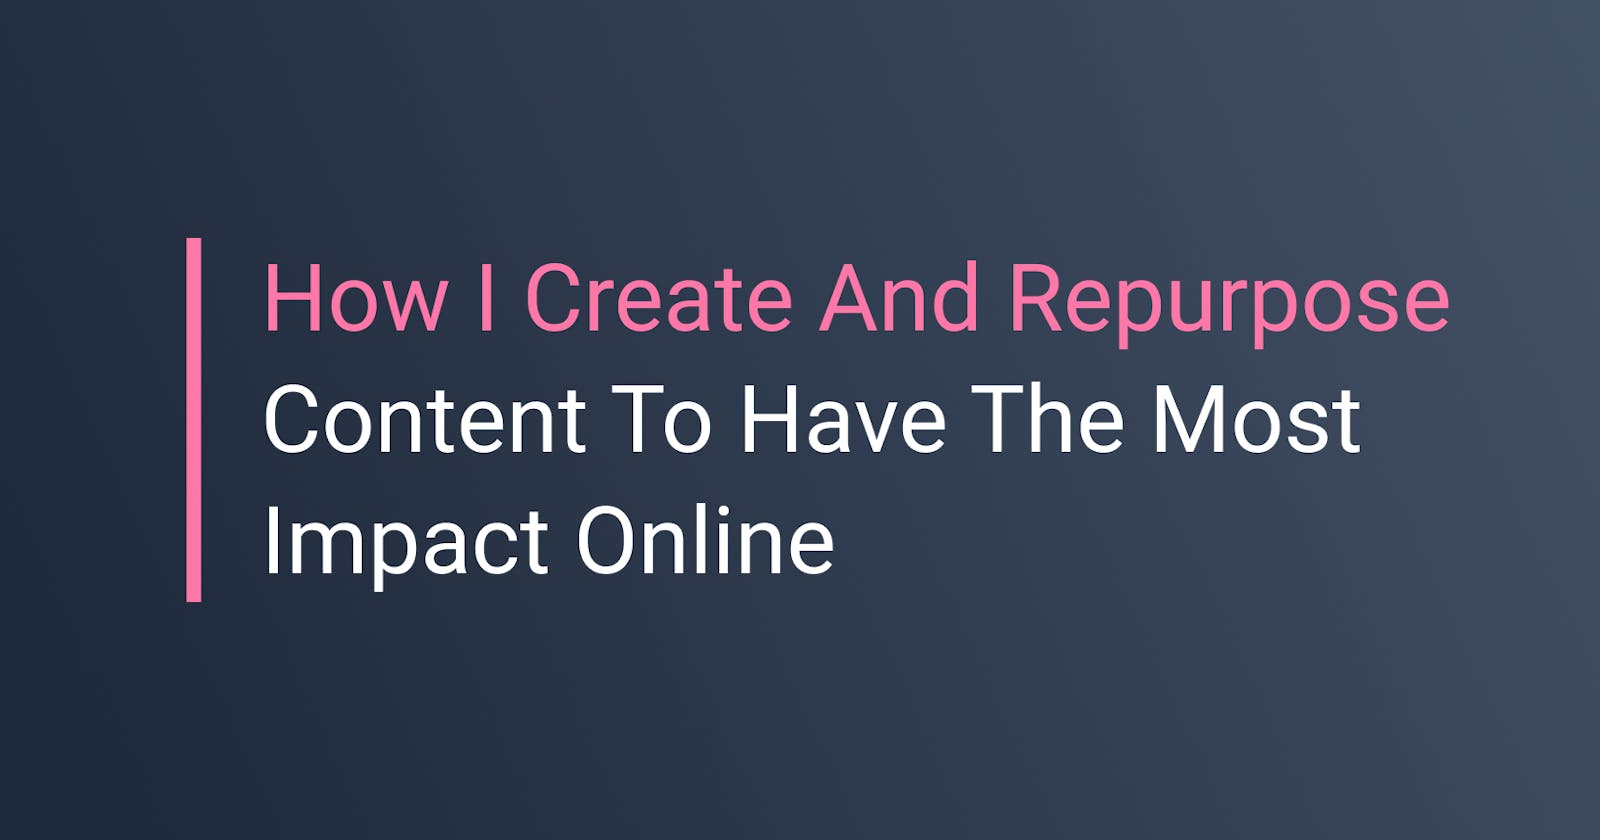 How I Create And Repurpose Content To Have The Most Impact Online